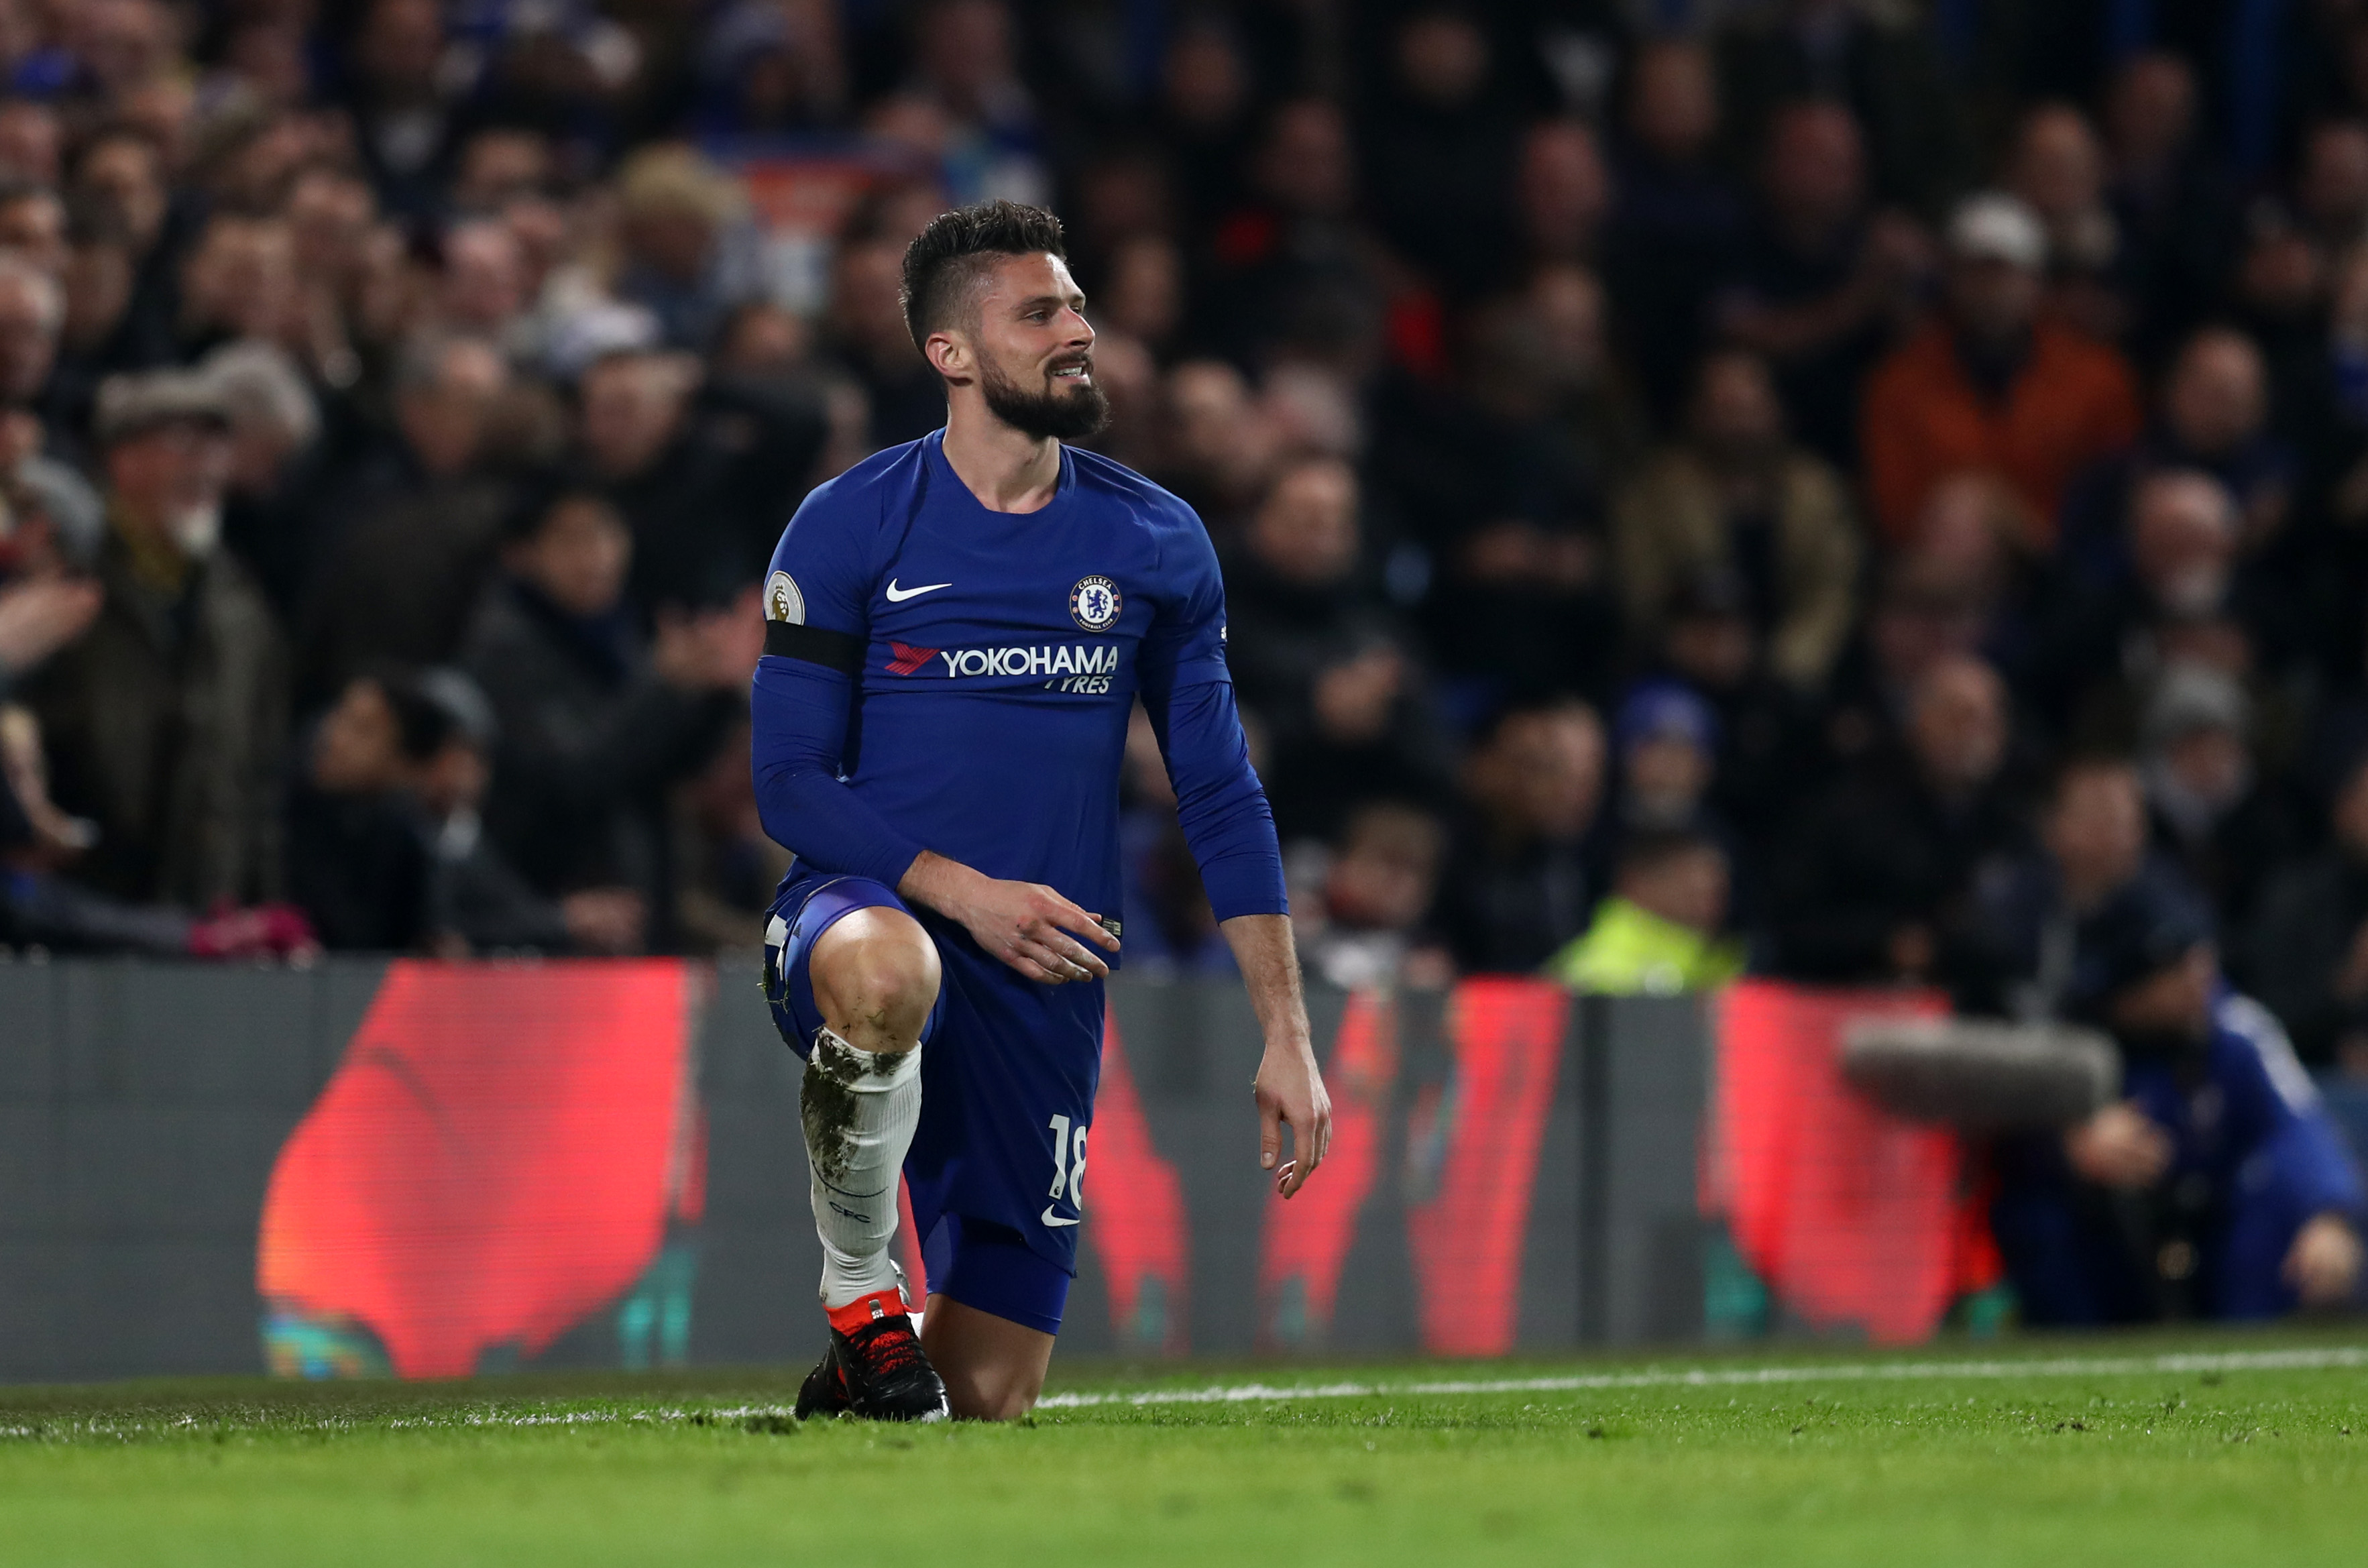 LONDON, ENGLAND - MARCH 10: Olivier Giroud of Chelsea reacts during the Premier League match between Chelsea and Crystal Palace at Stamford Bridge on March 10, 2018 in London, England. (Photo by Catherine Ivill/Getty Images)